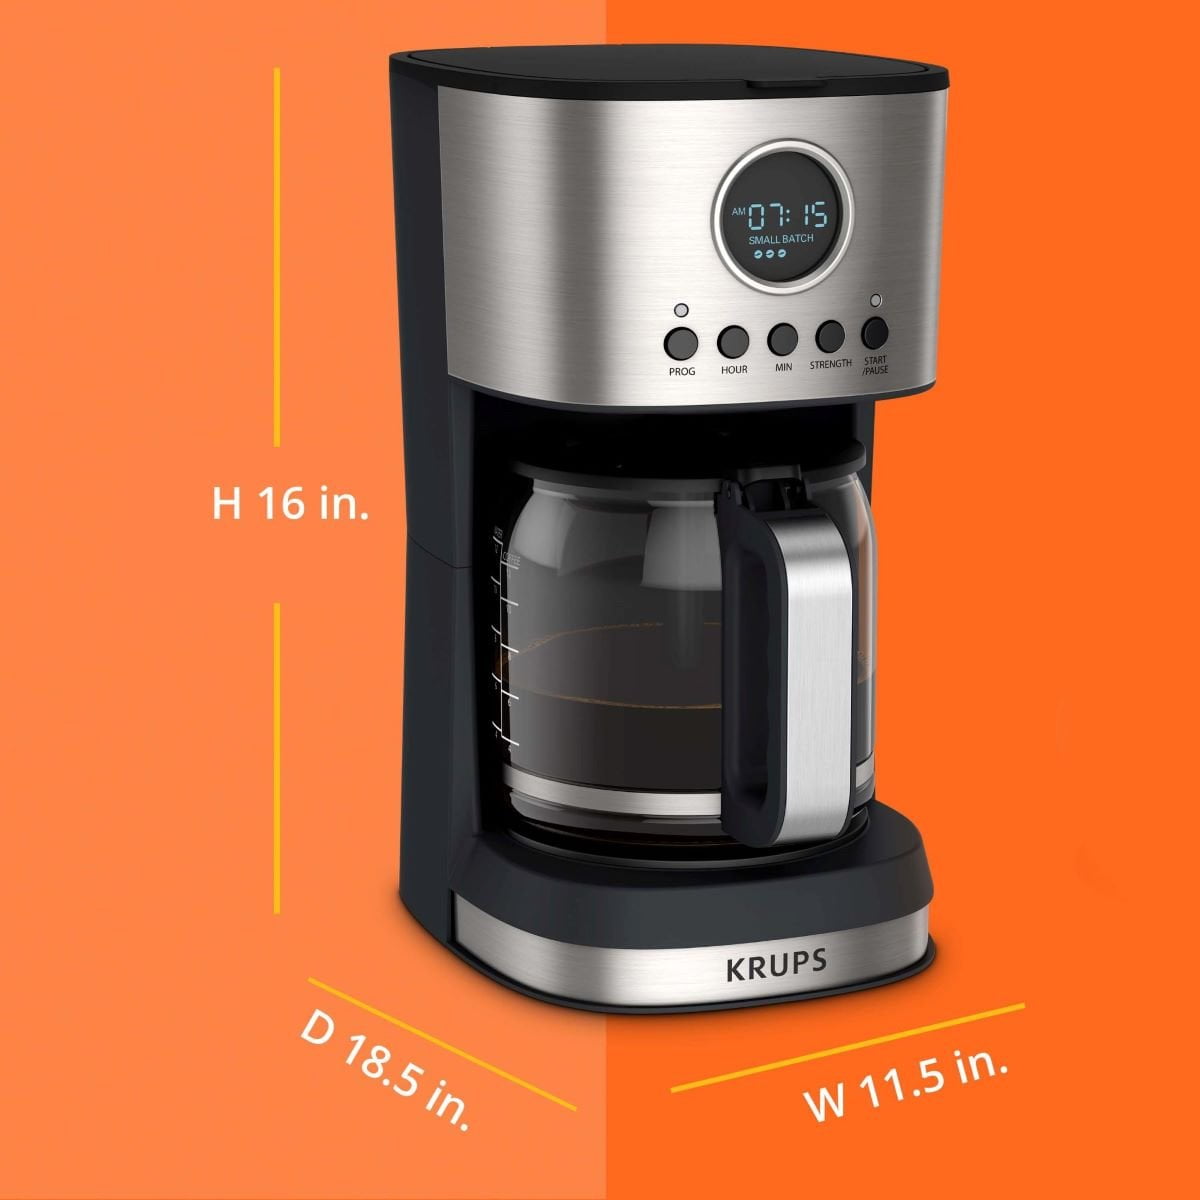 Krups Essential Brew Stainless Steel Drip Coffee Maker 12 cup 99 Watts  Digital Control, Coffee Filter, Drip Free, Dishwasher Safe Thermal Pot  Black 